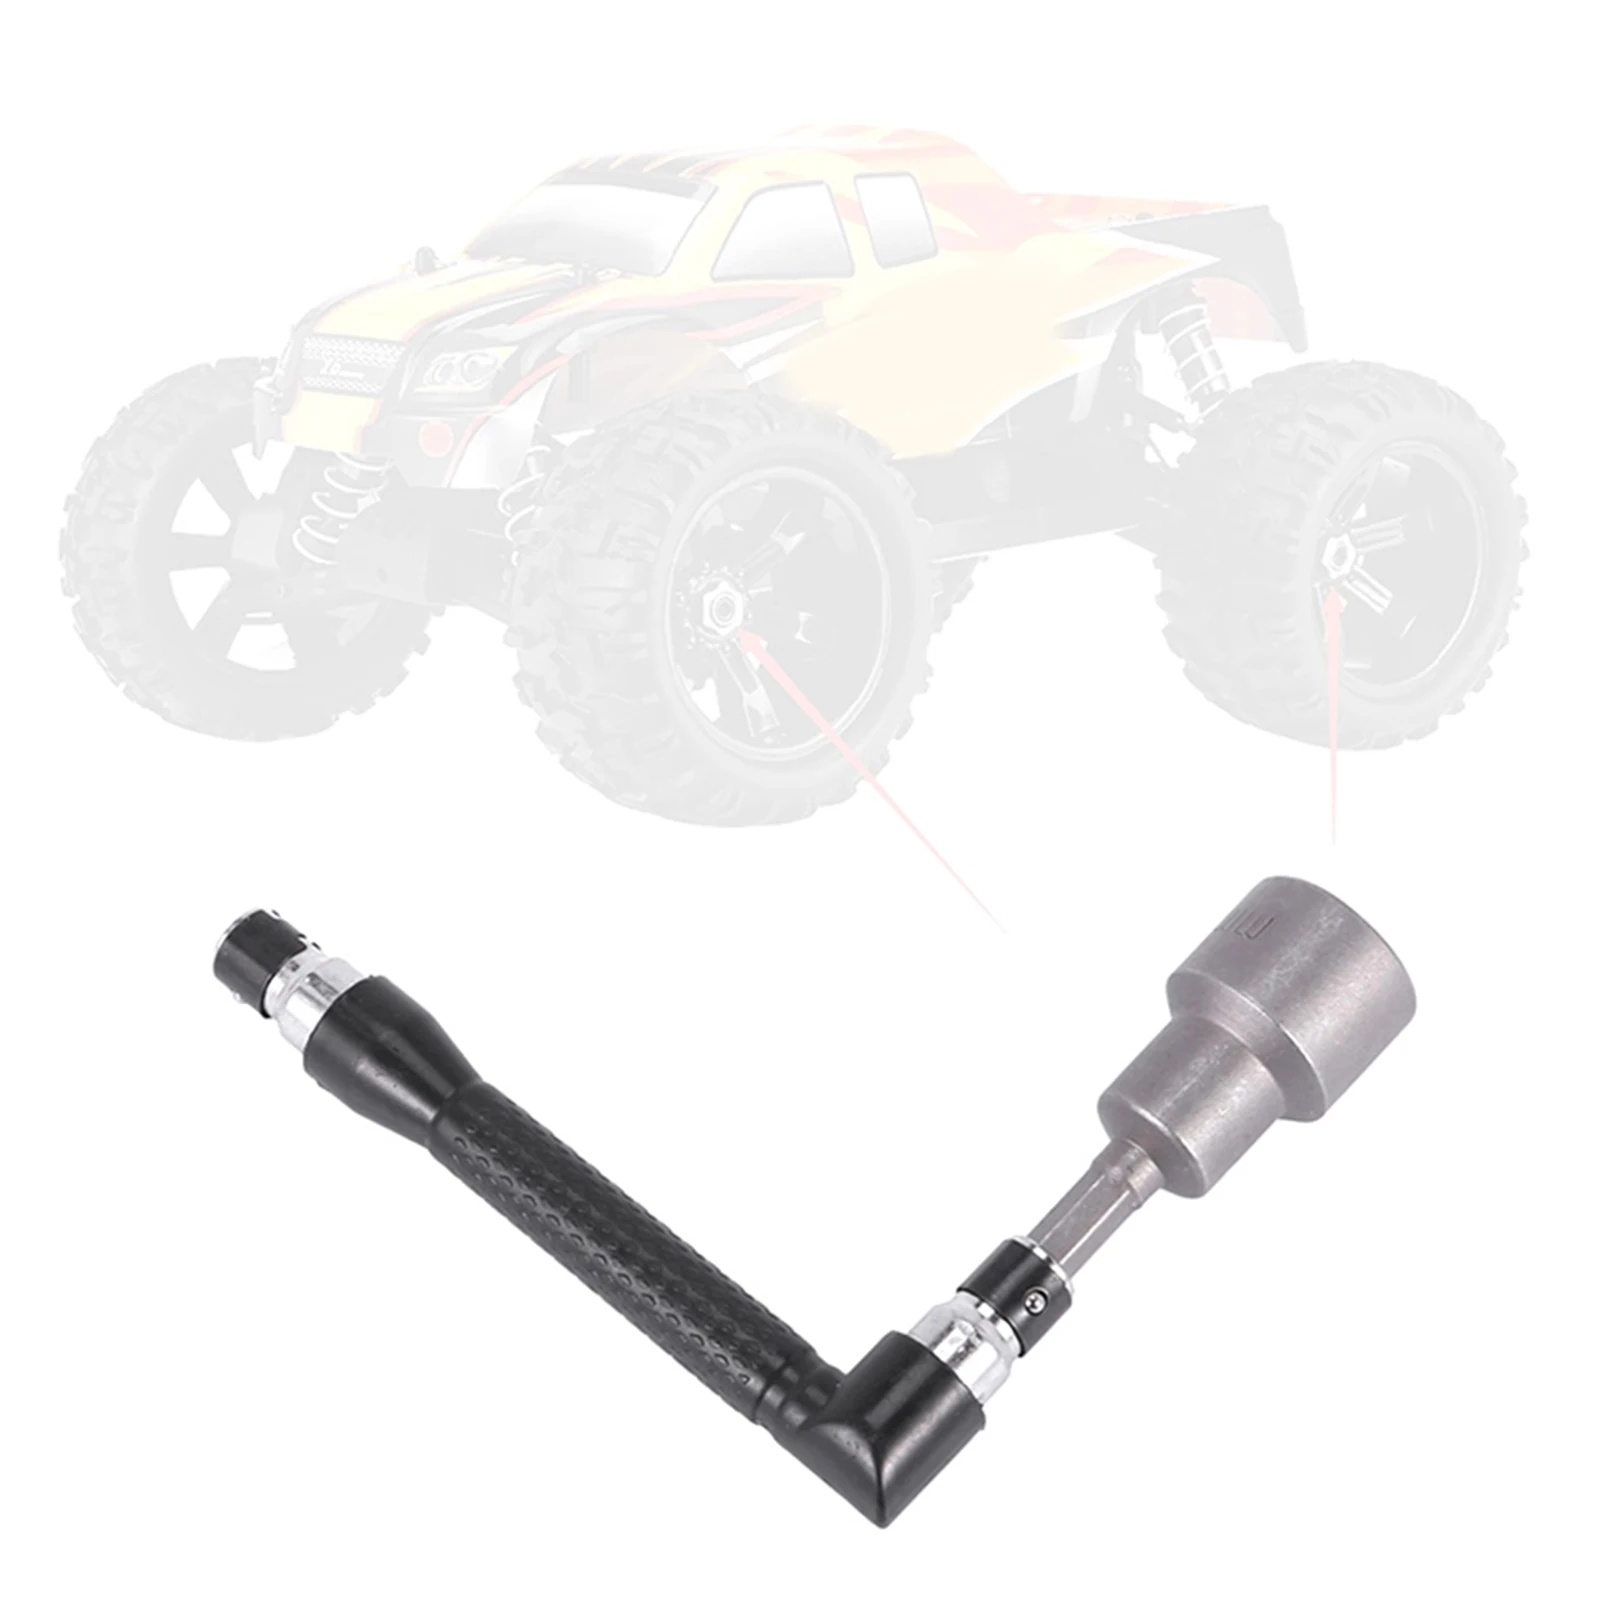 Durable Steel 17mm RC Car Wheel HEX Nut Wrench Multifunctional Disassembly Spanner Tool for RC 1/7 1/8 Monster Truck Tire